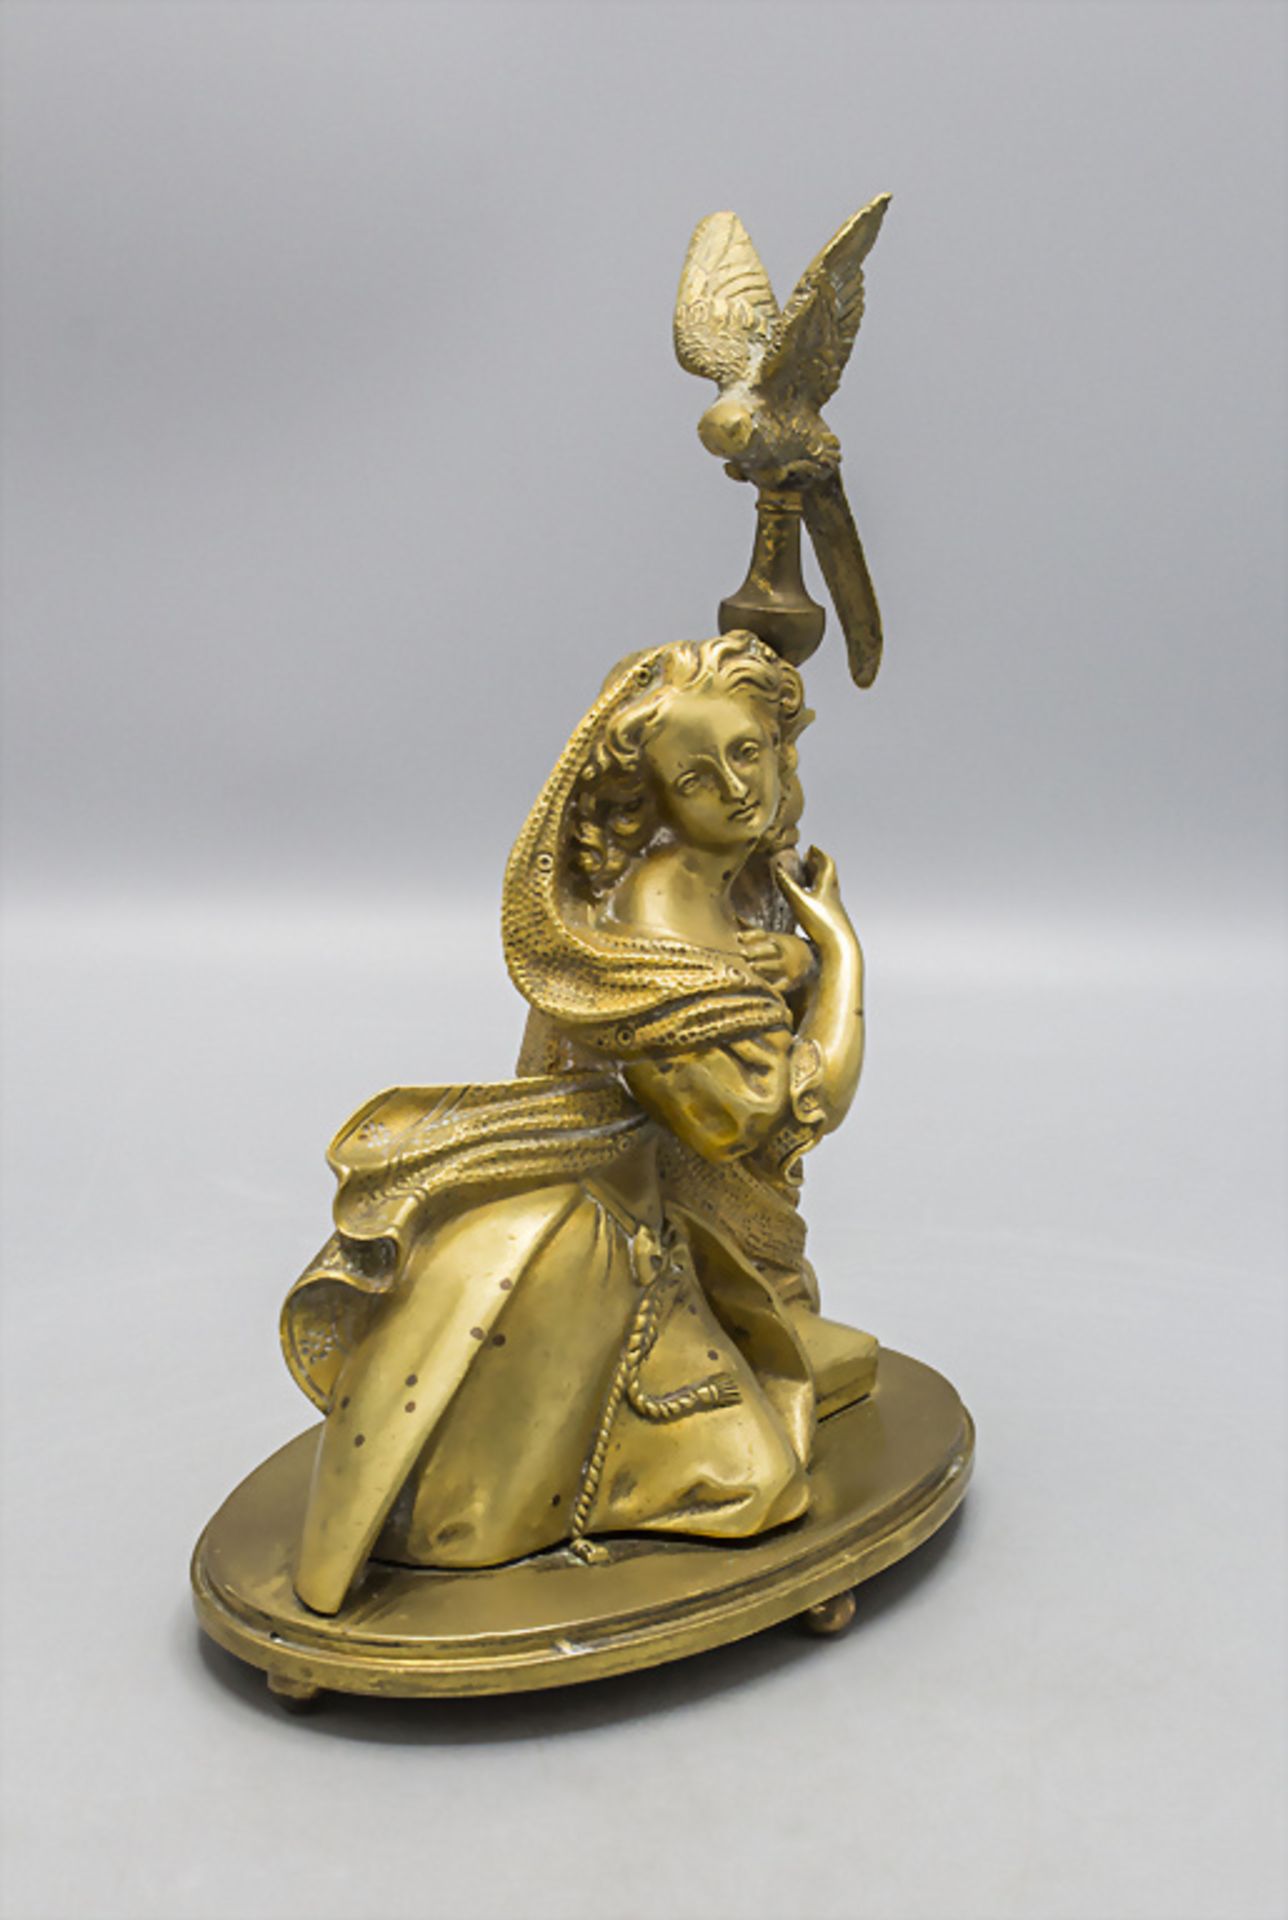 Bronze Figur 'Junge Frau mit Papagei' / A bronze figure of a young woman with a parrot, 19. Jh. - Image 2 of 5